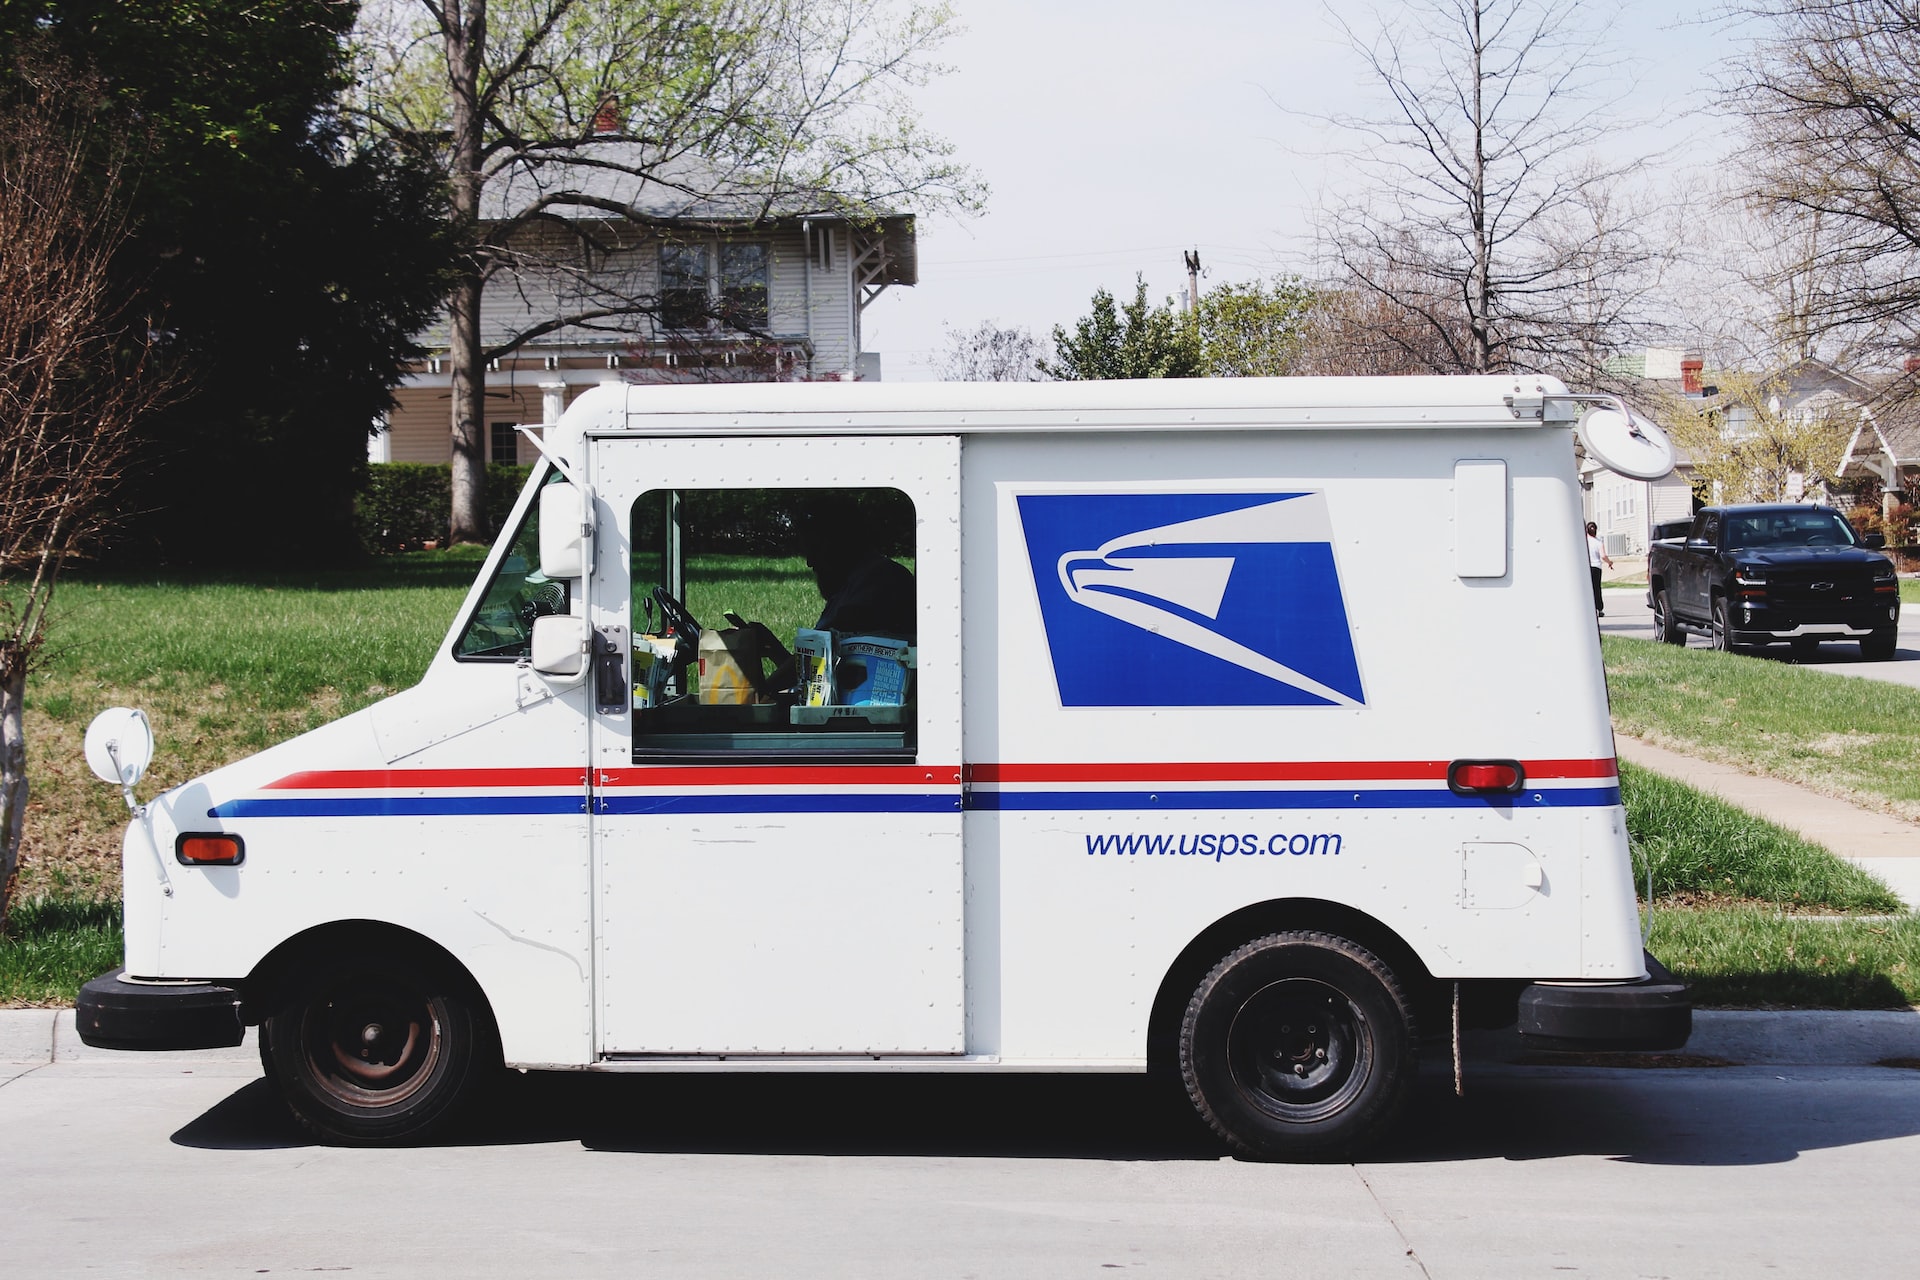 How to Track a USPS Order Get Updates on Your Package Delivery